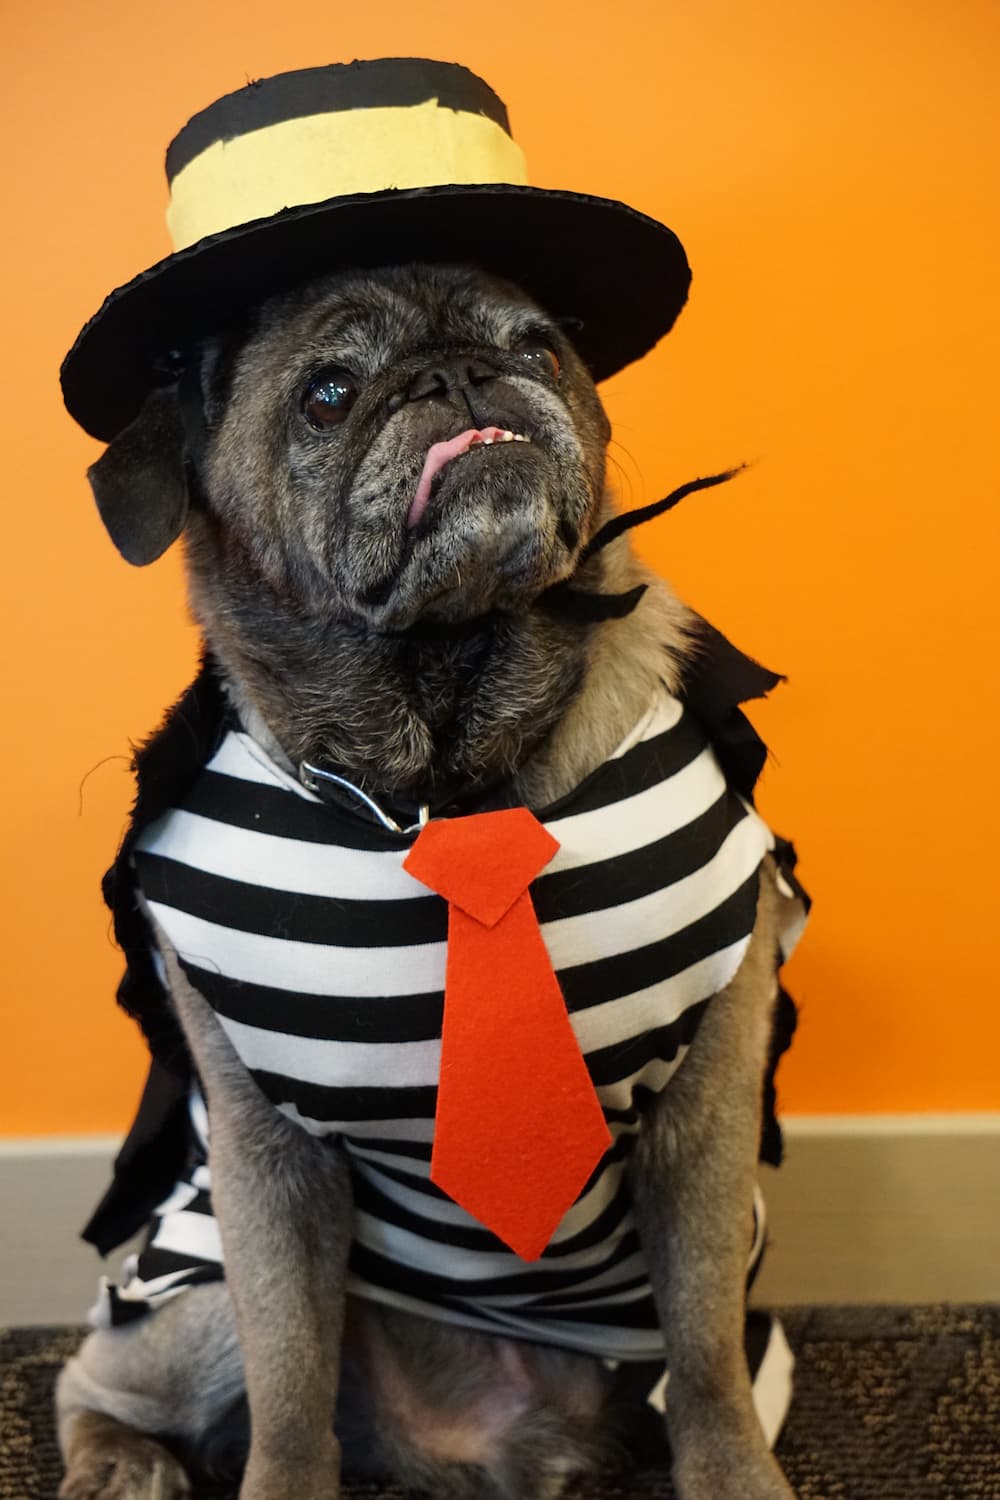 Silver Pug wearing finished Hamburgler costume in front of orange wall